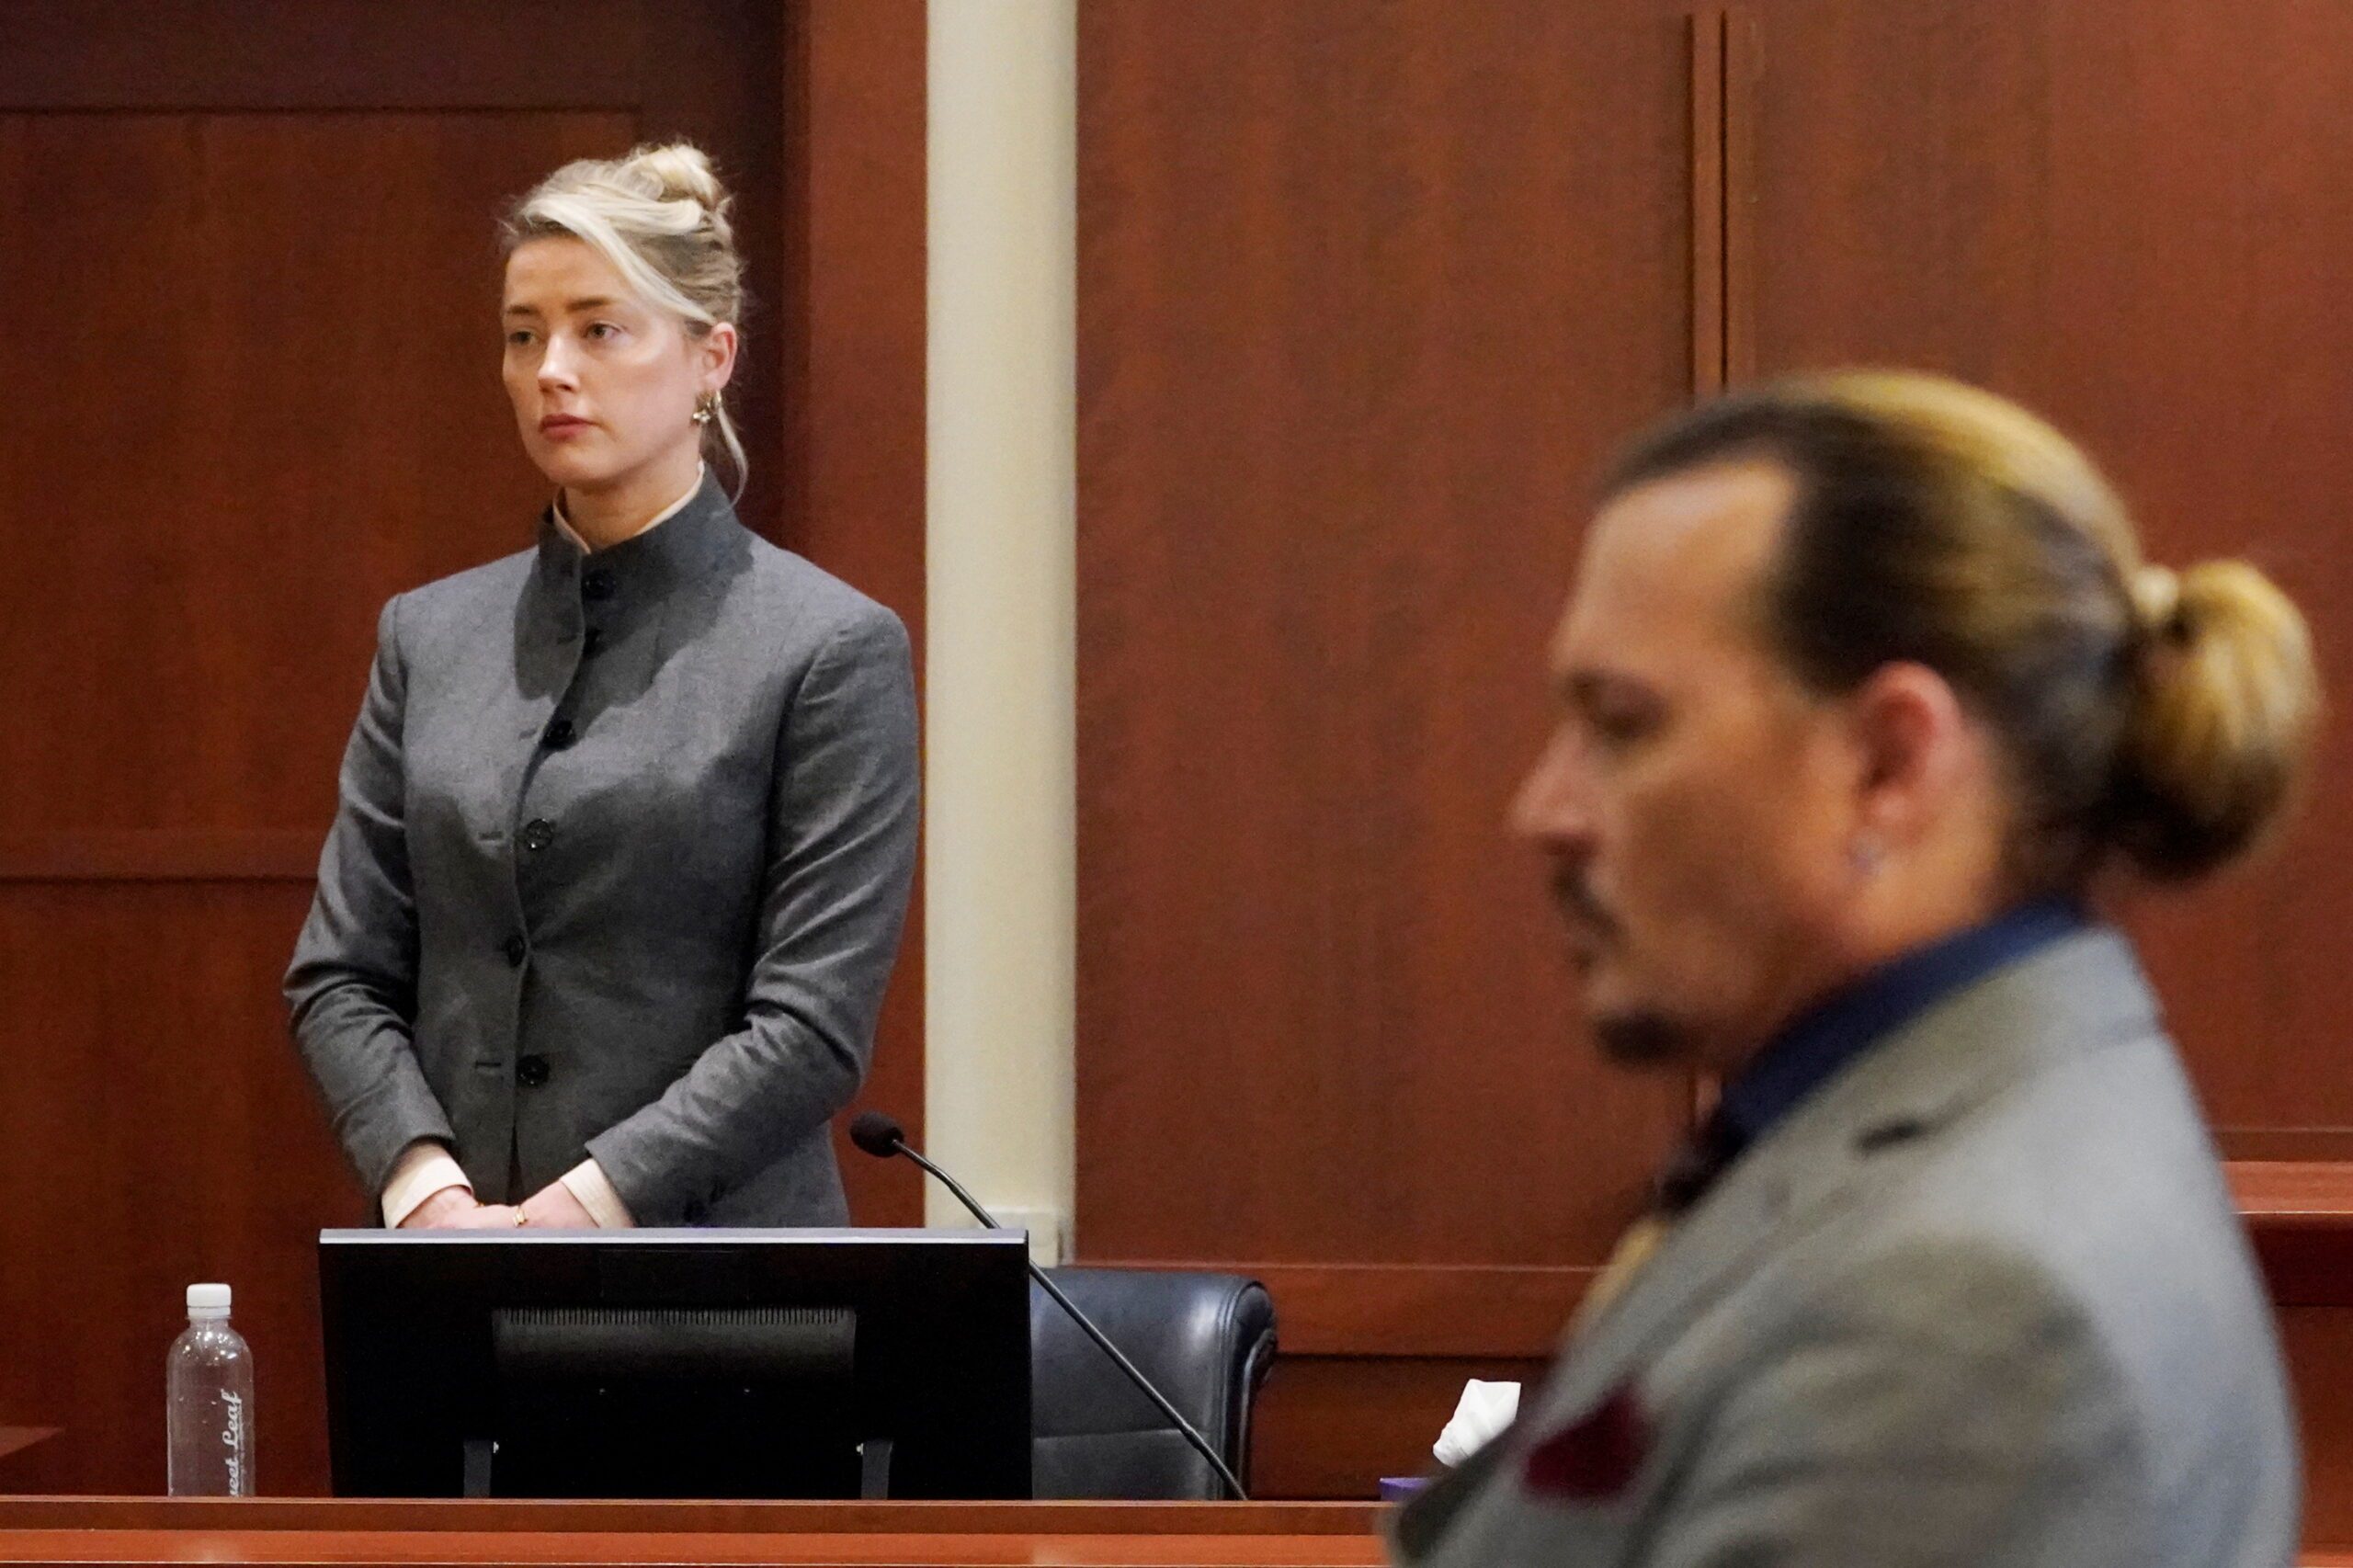 Johnny Depp’s attorneys challenge Amber Heard on abuse claims